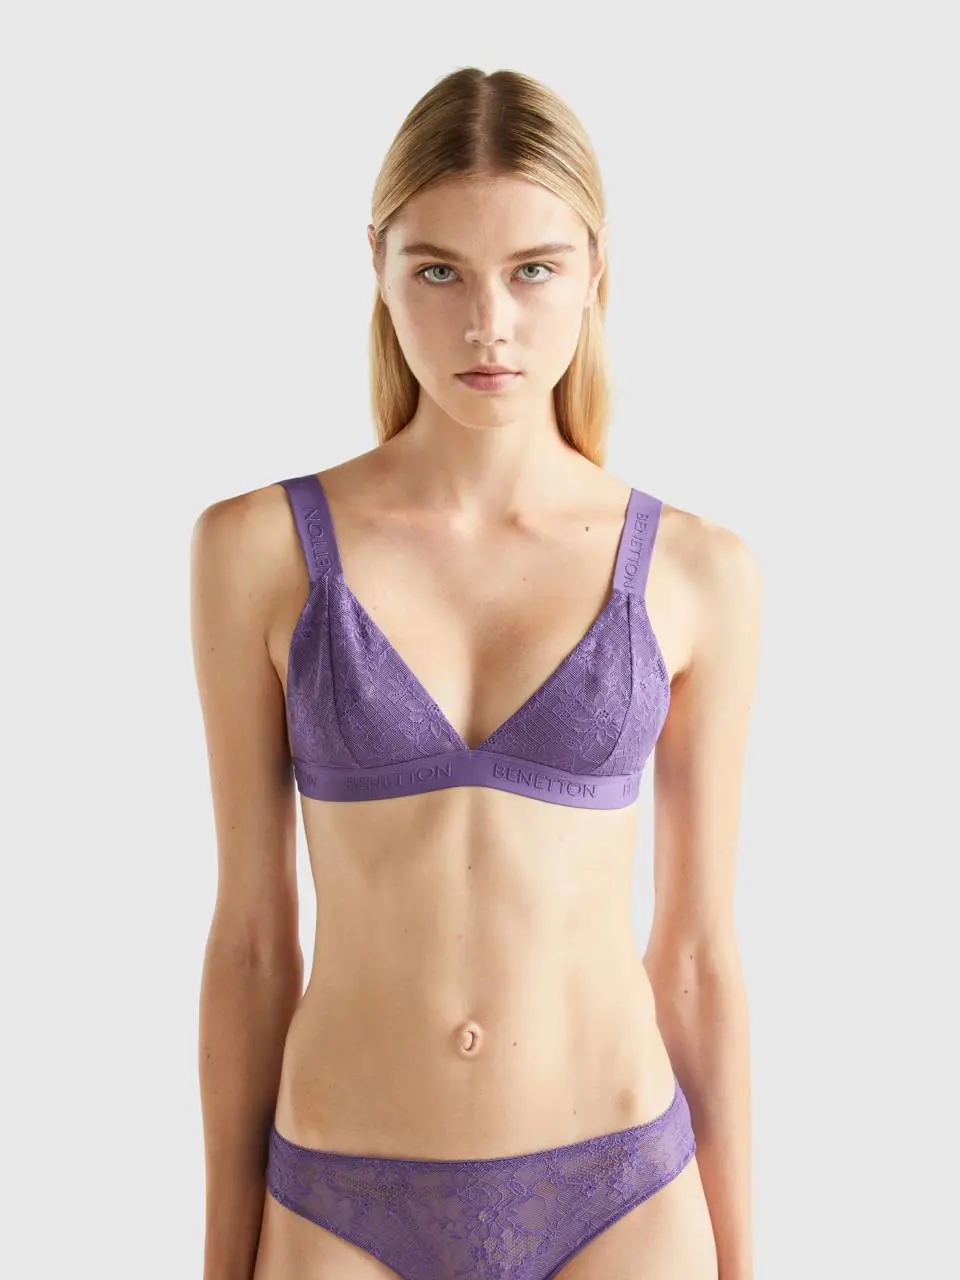 Benetton triangle bra with lace. 1